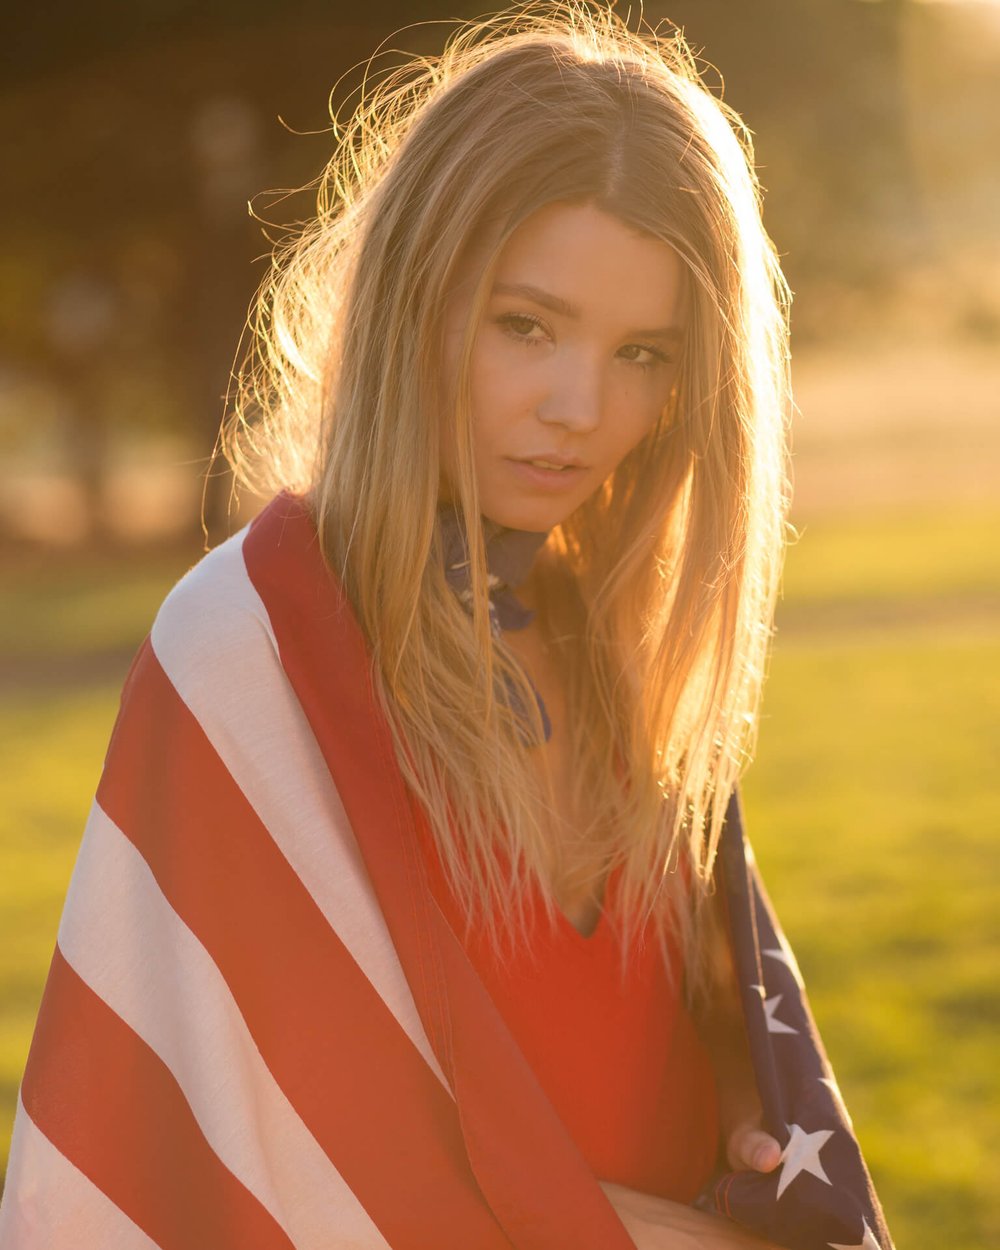 blonde woman wearing united states flag at golden hour